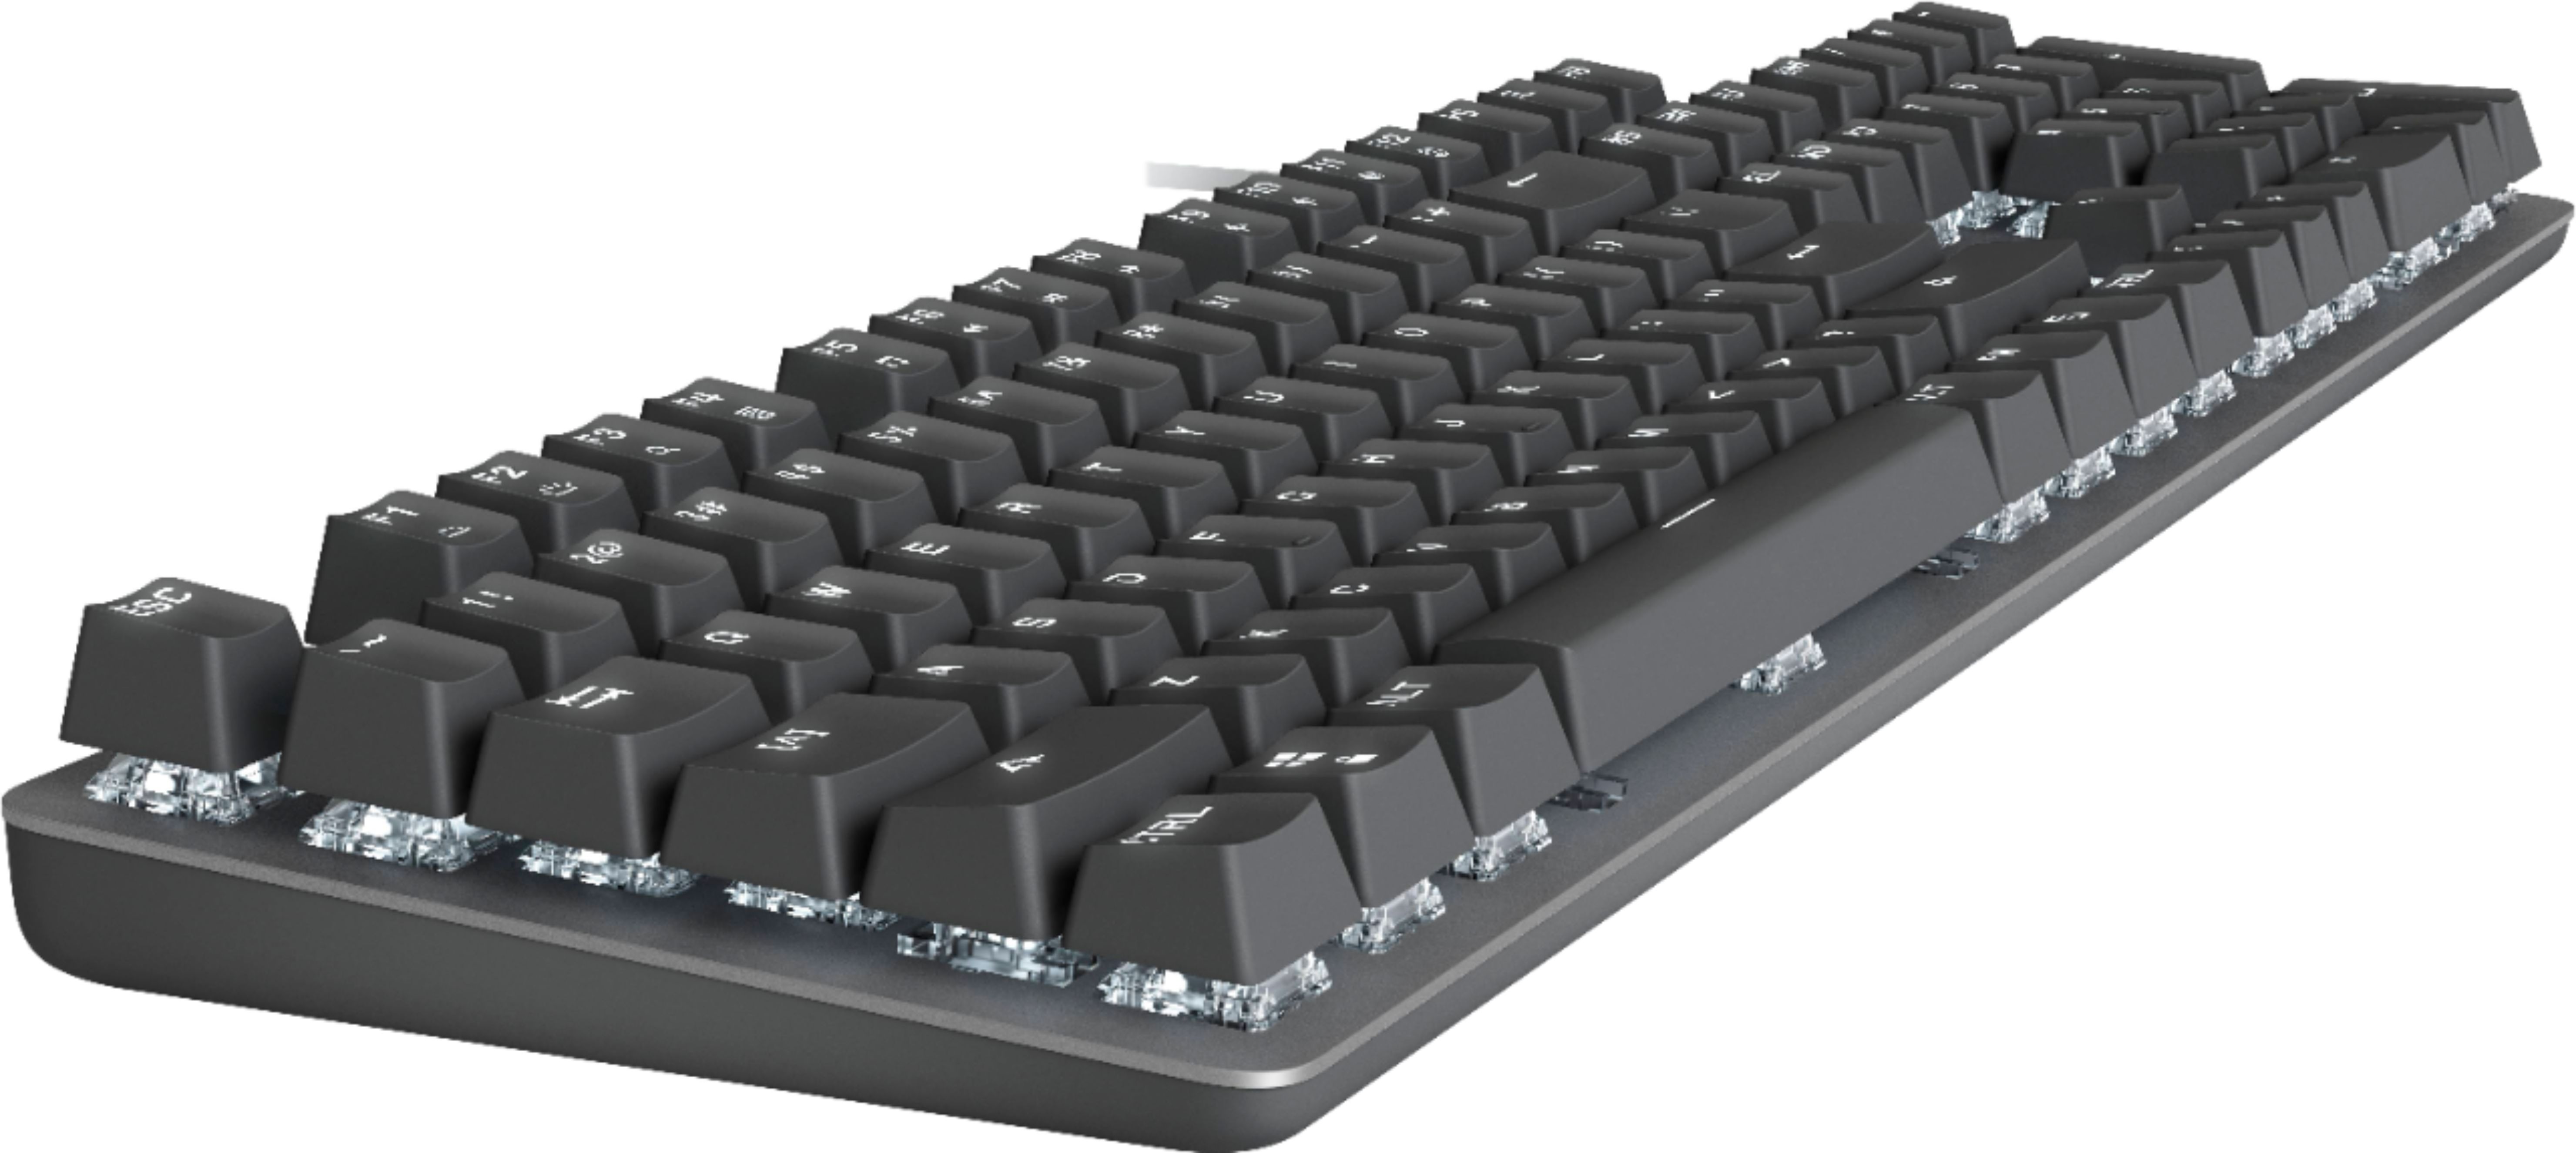 Logitech K845 Full-size Wired Mechanical Cherry MX Blue Clicky Switch Keyboard with Five Backlight Modes Graphite - Best Buy